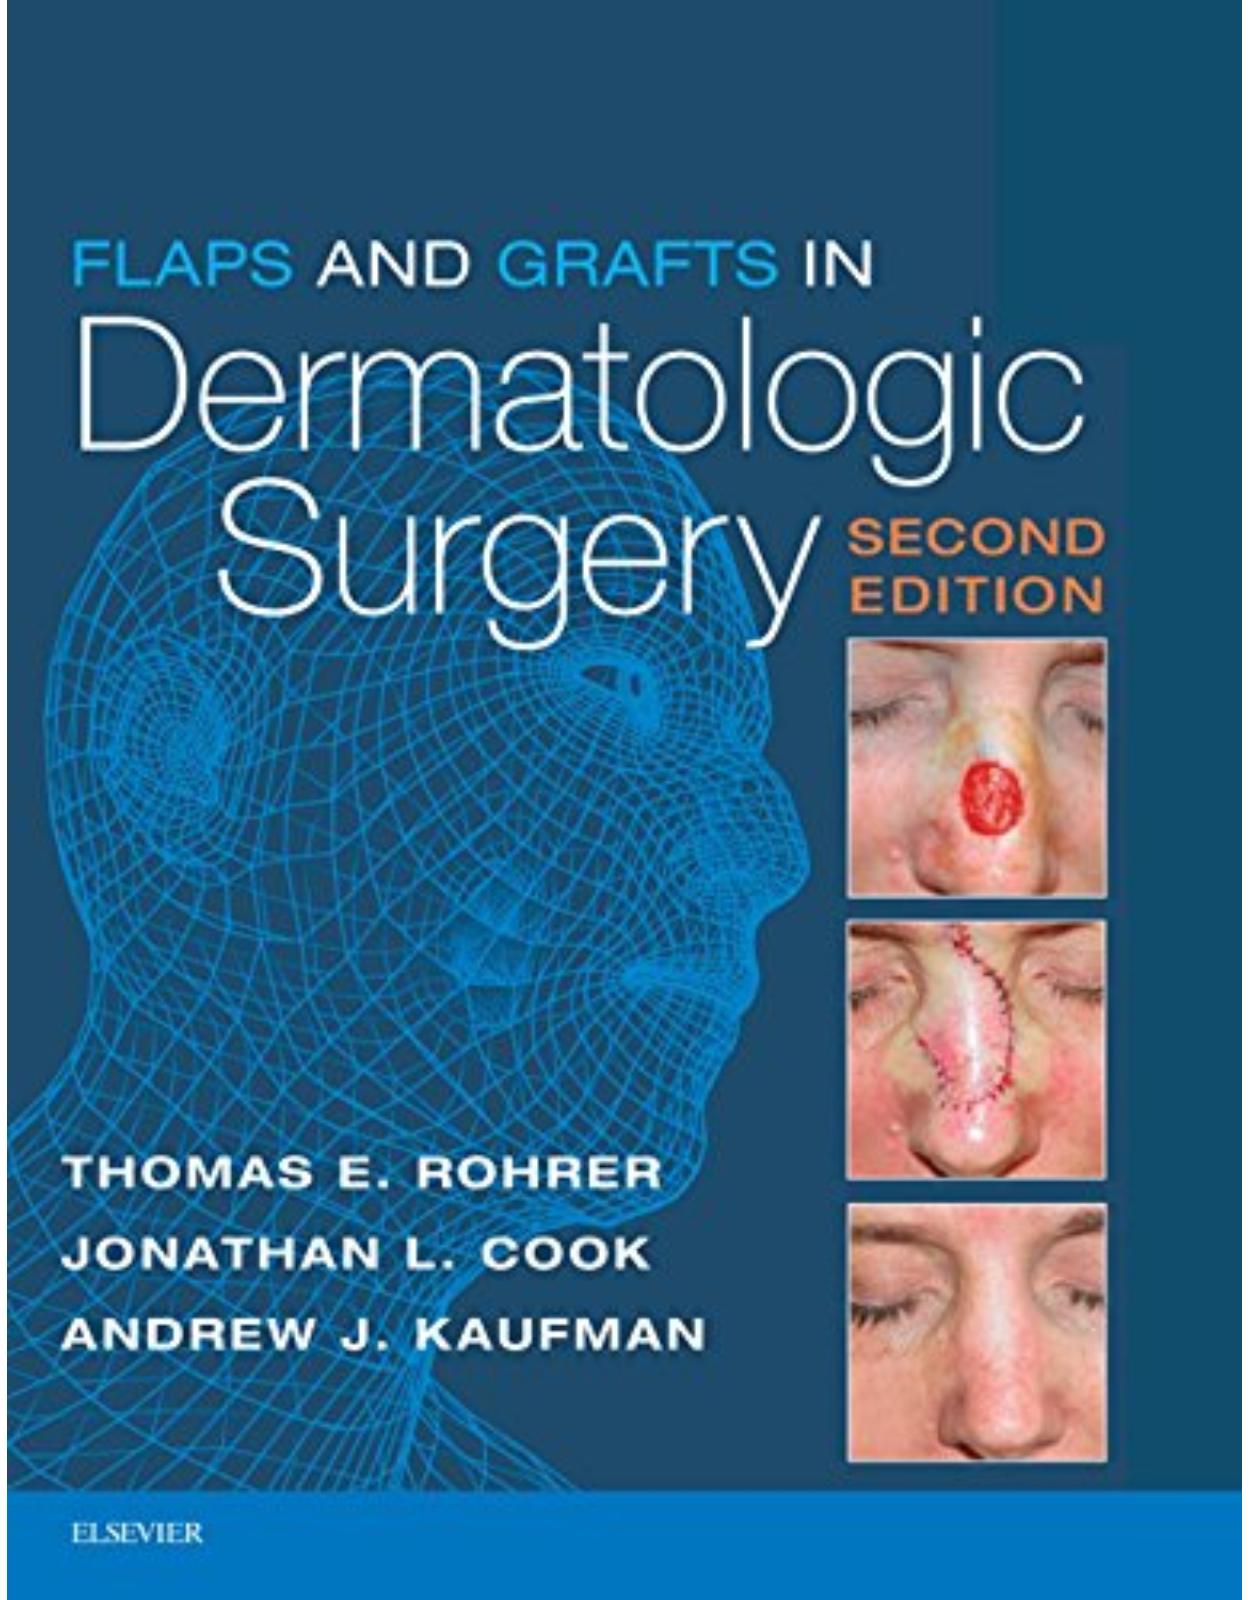 Flaps and Grafts in Dermatologic Surgery, 2nd Edition